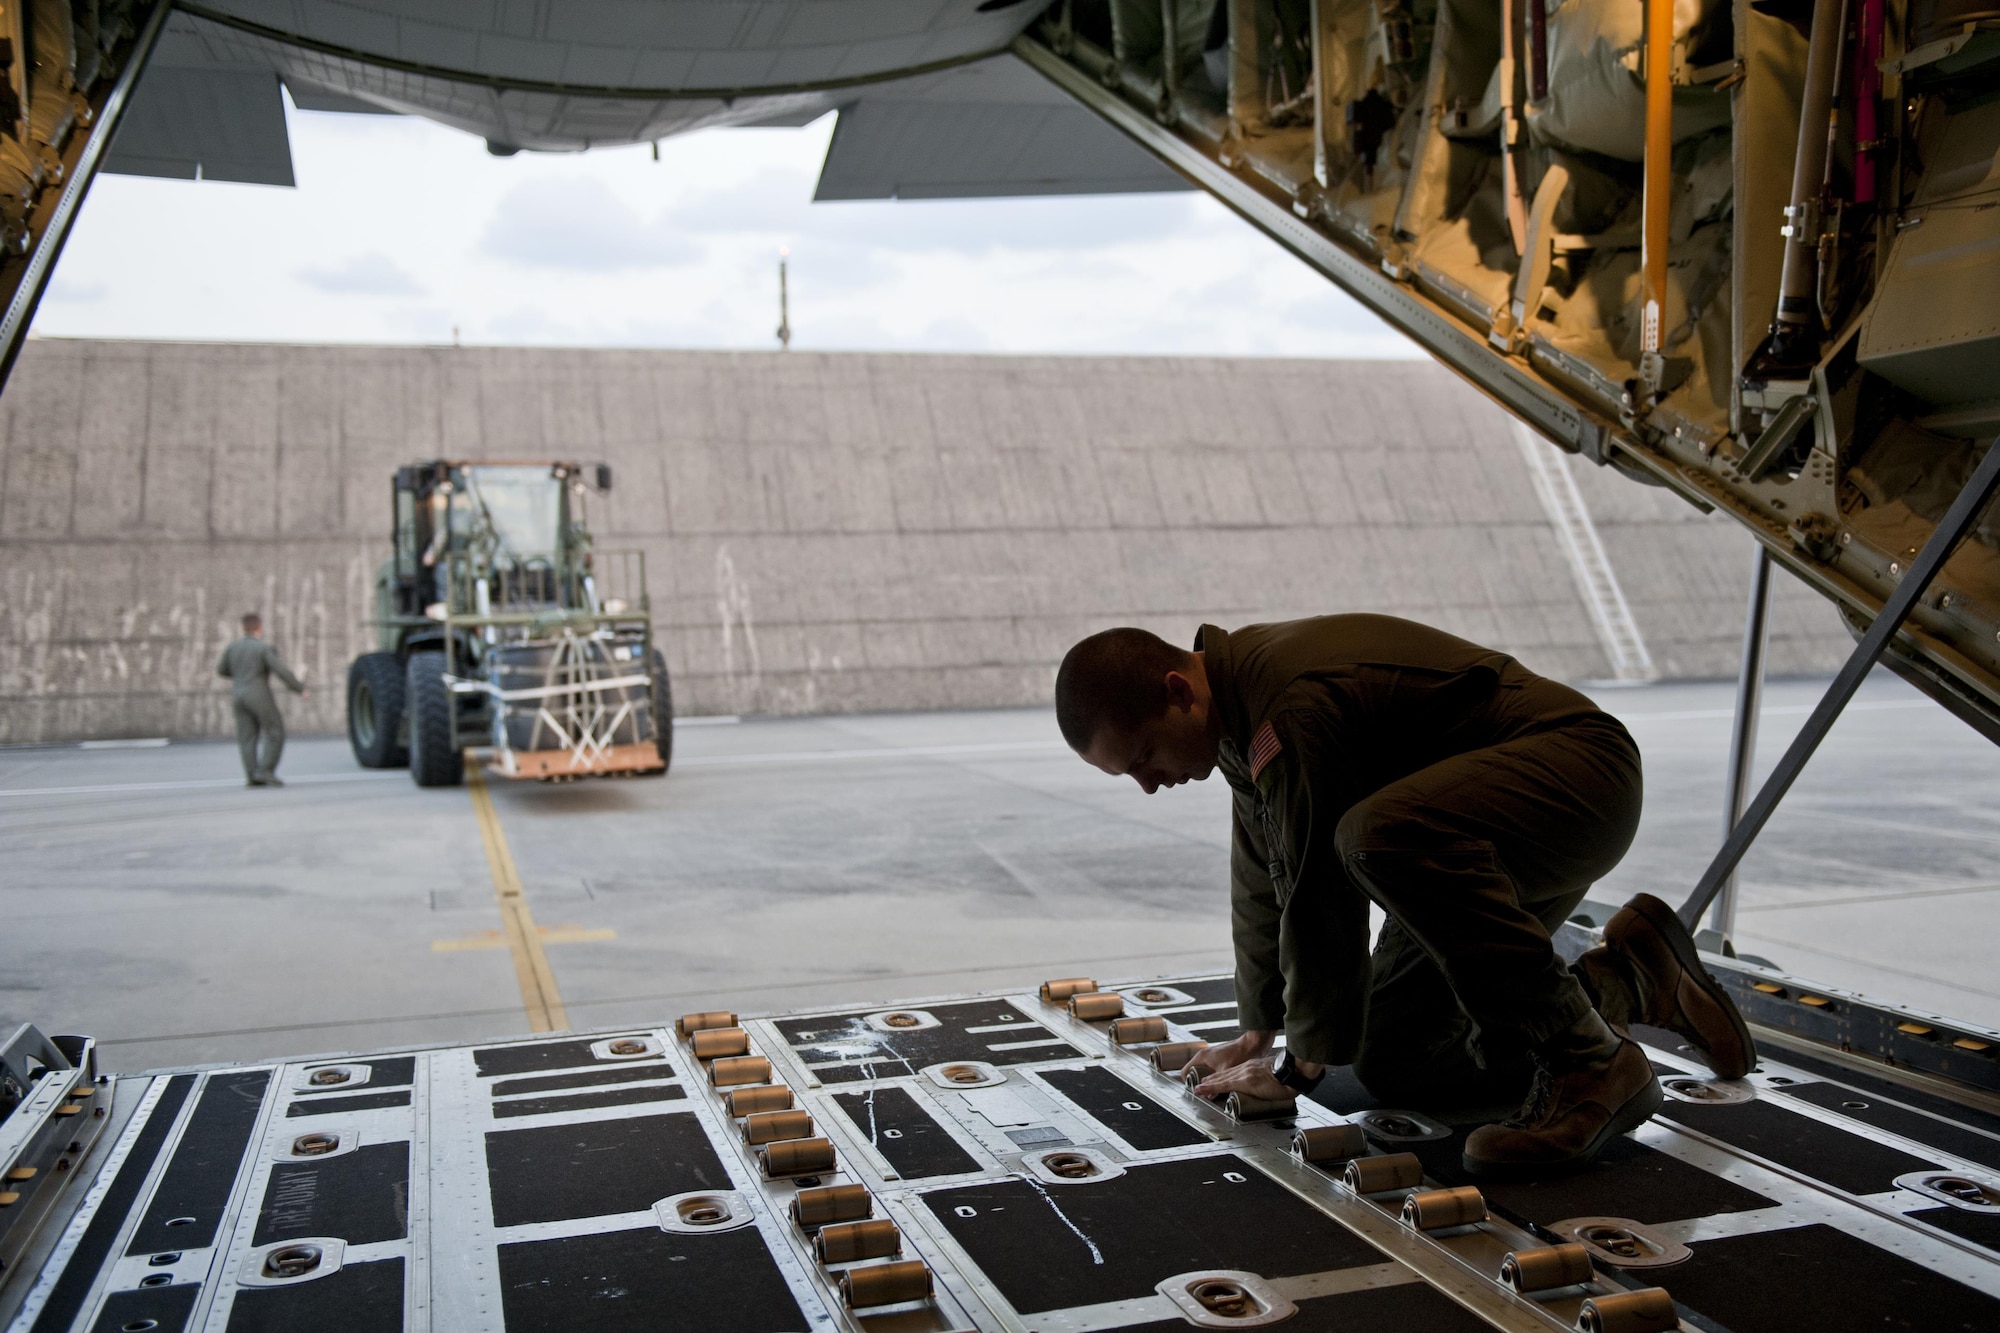 U.S. Air Force Senior Airman Zach Harmon, 17th Special Operations Squadron MC-130J Commando II loadmaster, prepares a cargo deck for loading during a training exercise Feb. 17, 2016, at Kadena Air Base, Japan. Harmon participated in a fast-reaction simulation that tested the squadron's capability to quickly and safely mobilize their entire fleet of aircraft for cargo drops, short runway landings and takeoffs, and helicopter air-to-air refueling. (U.S. Air Force photo by Senior Airman Peter Reft/Released)